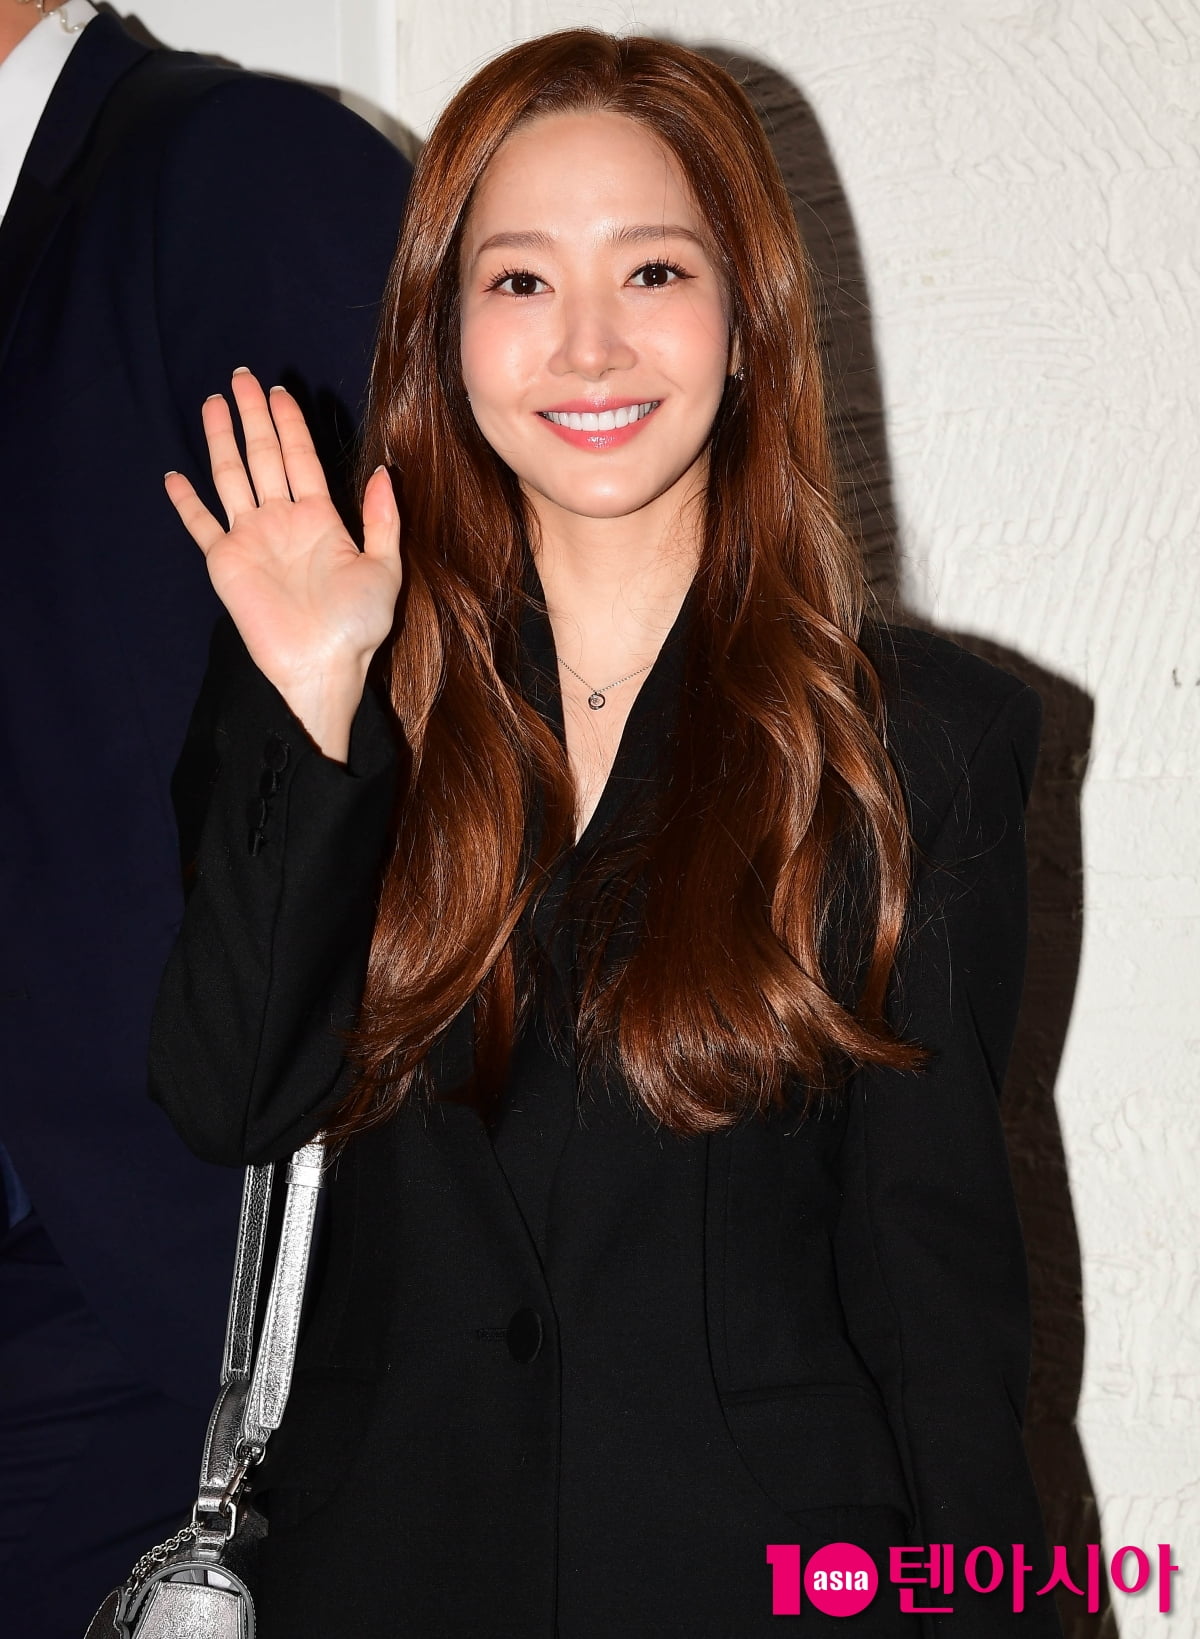 Park Min-young, caught by the hair after 11 months... It's not even a suspect investigation, so why bother again?